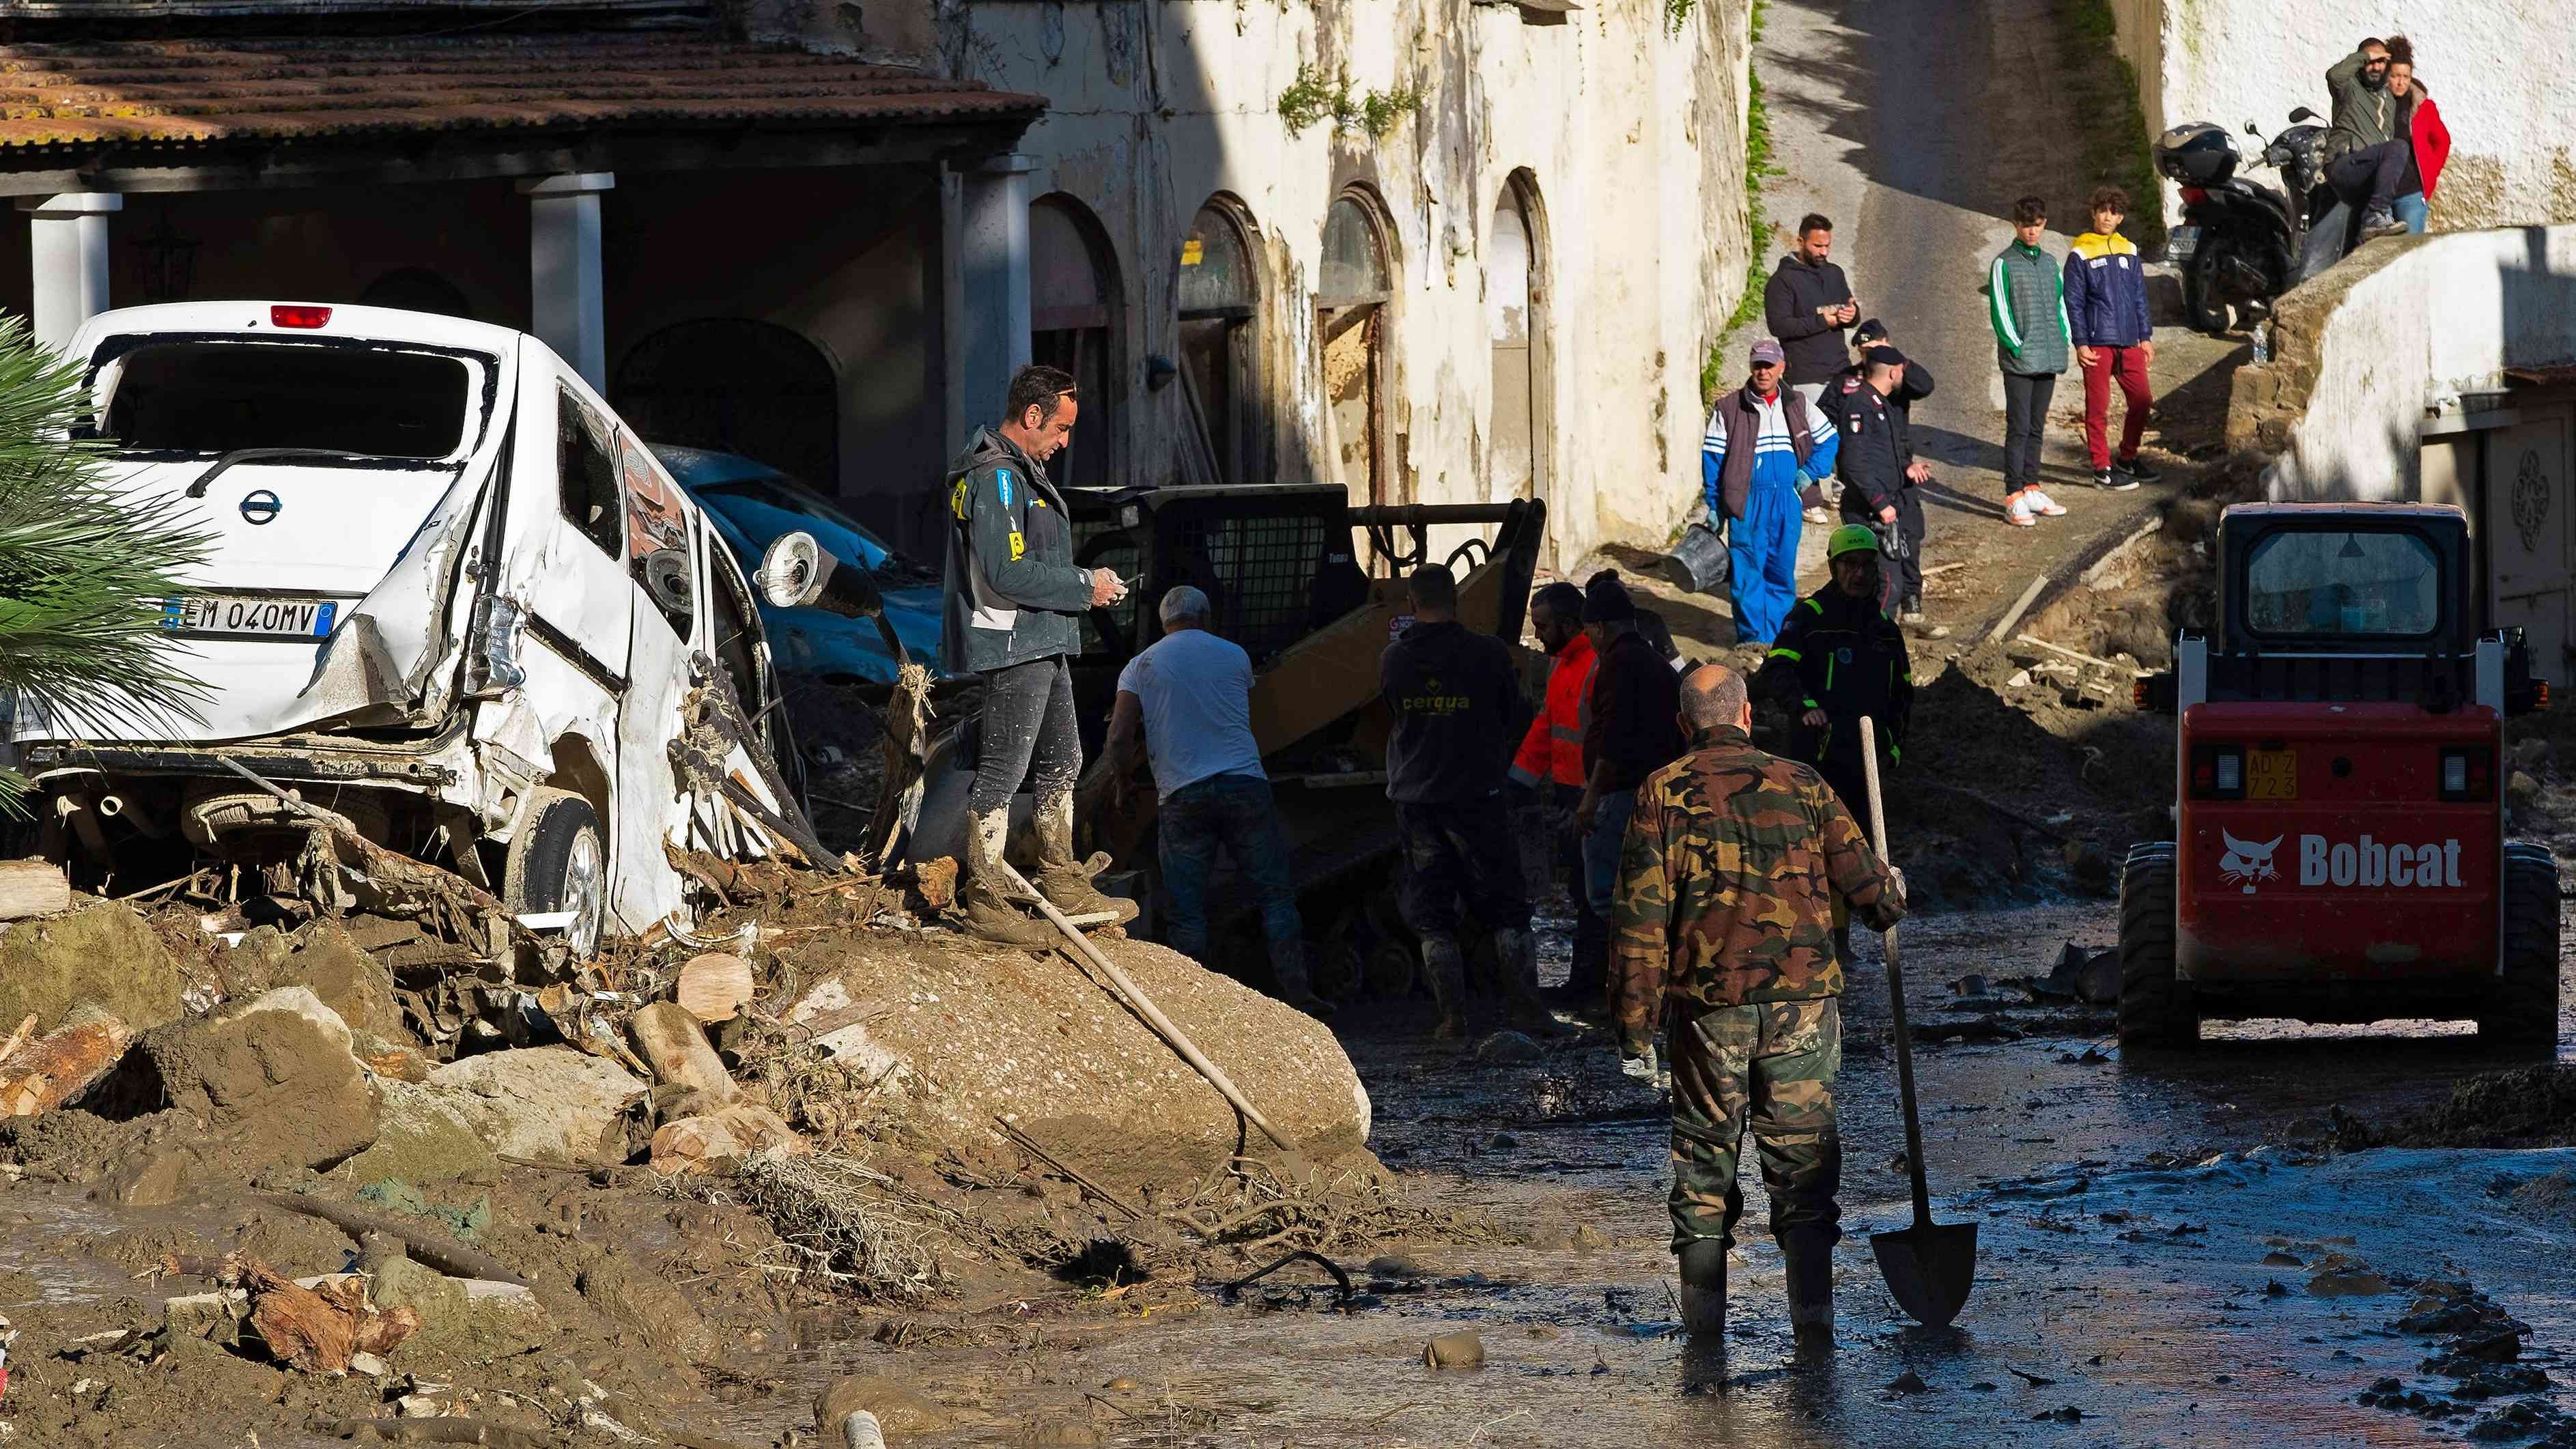 People work on the damaged street in Casamicciola, following heavy rains that caused a landslide. Credit: AFP Photo